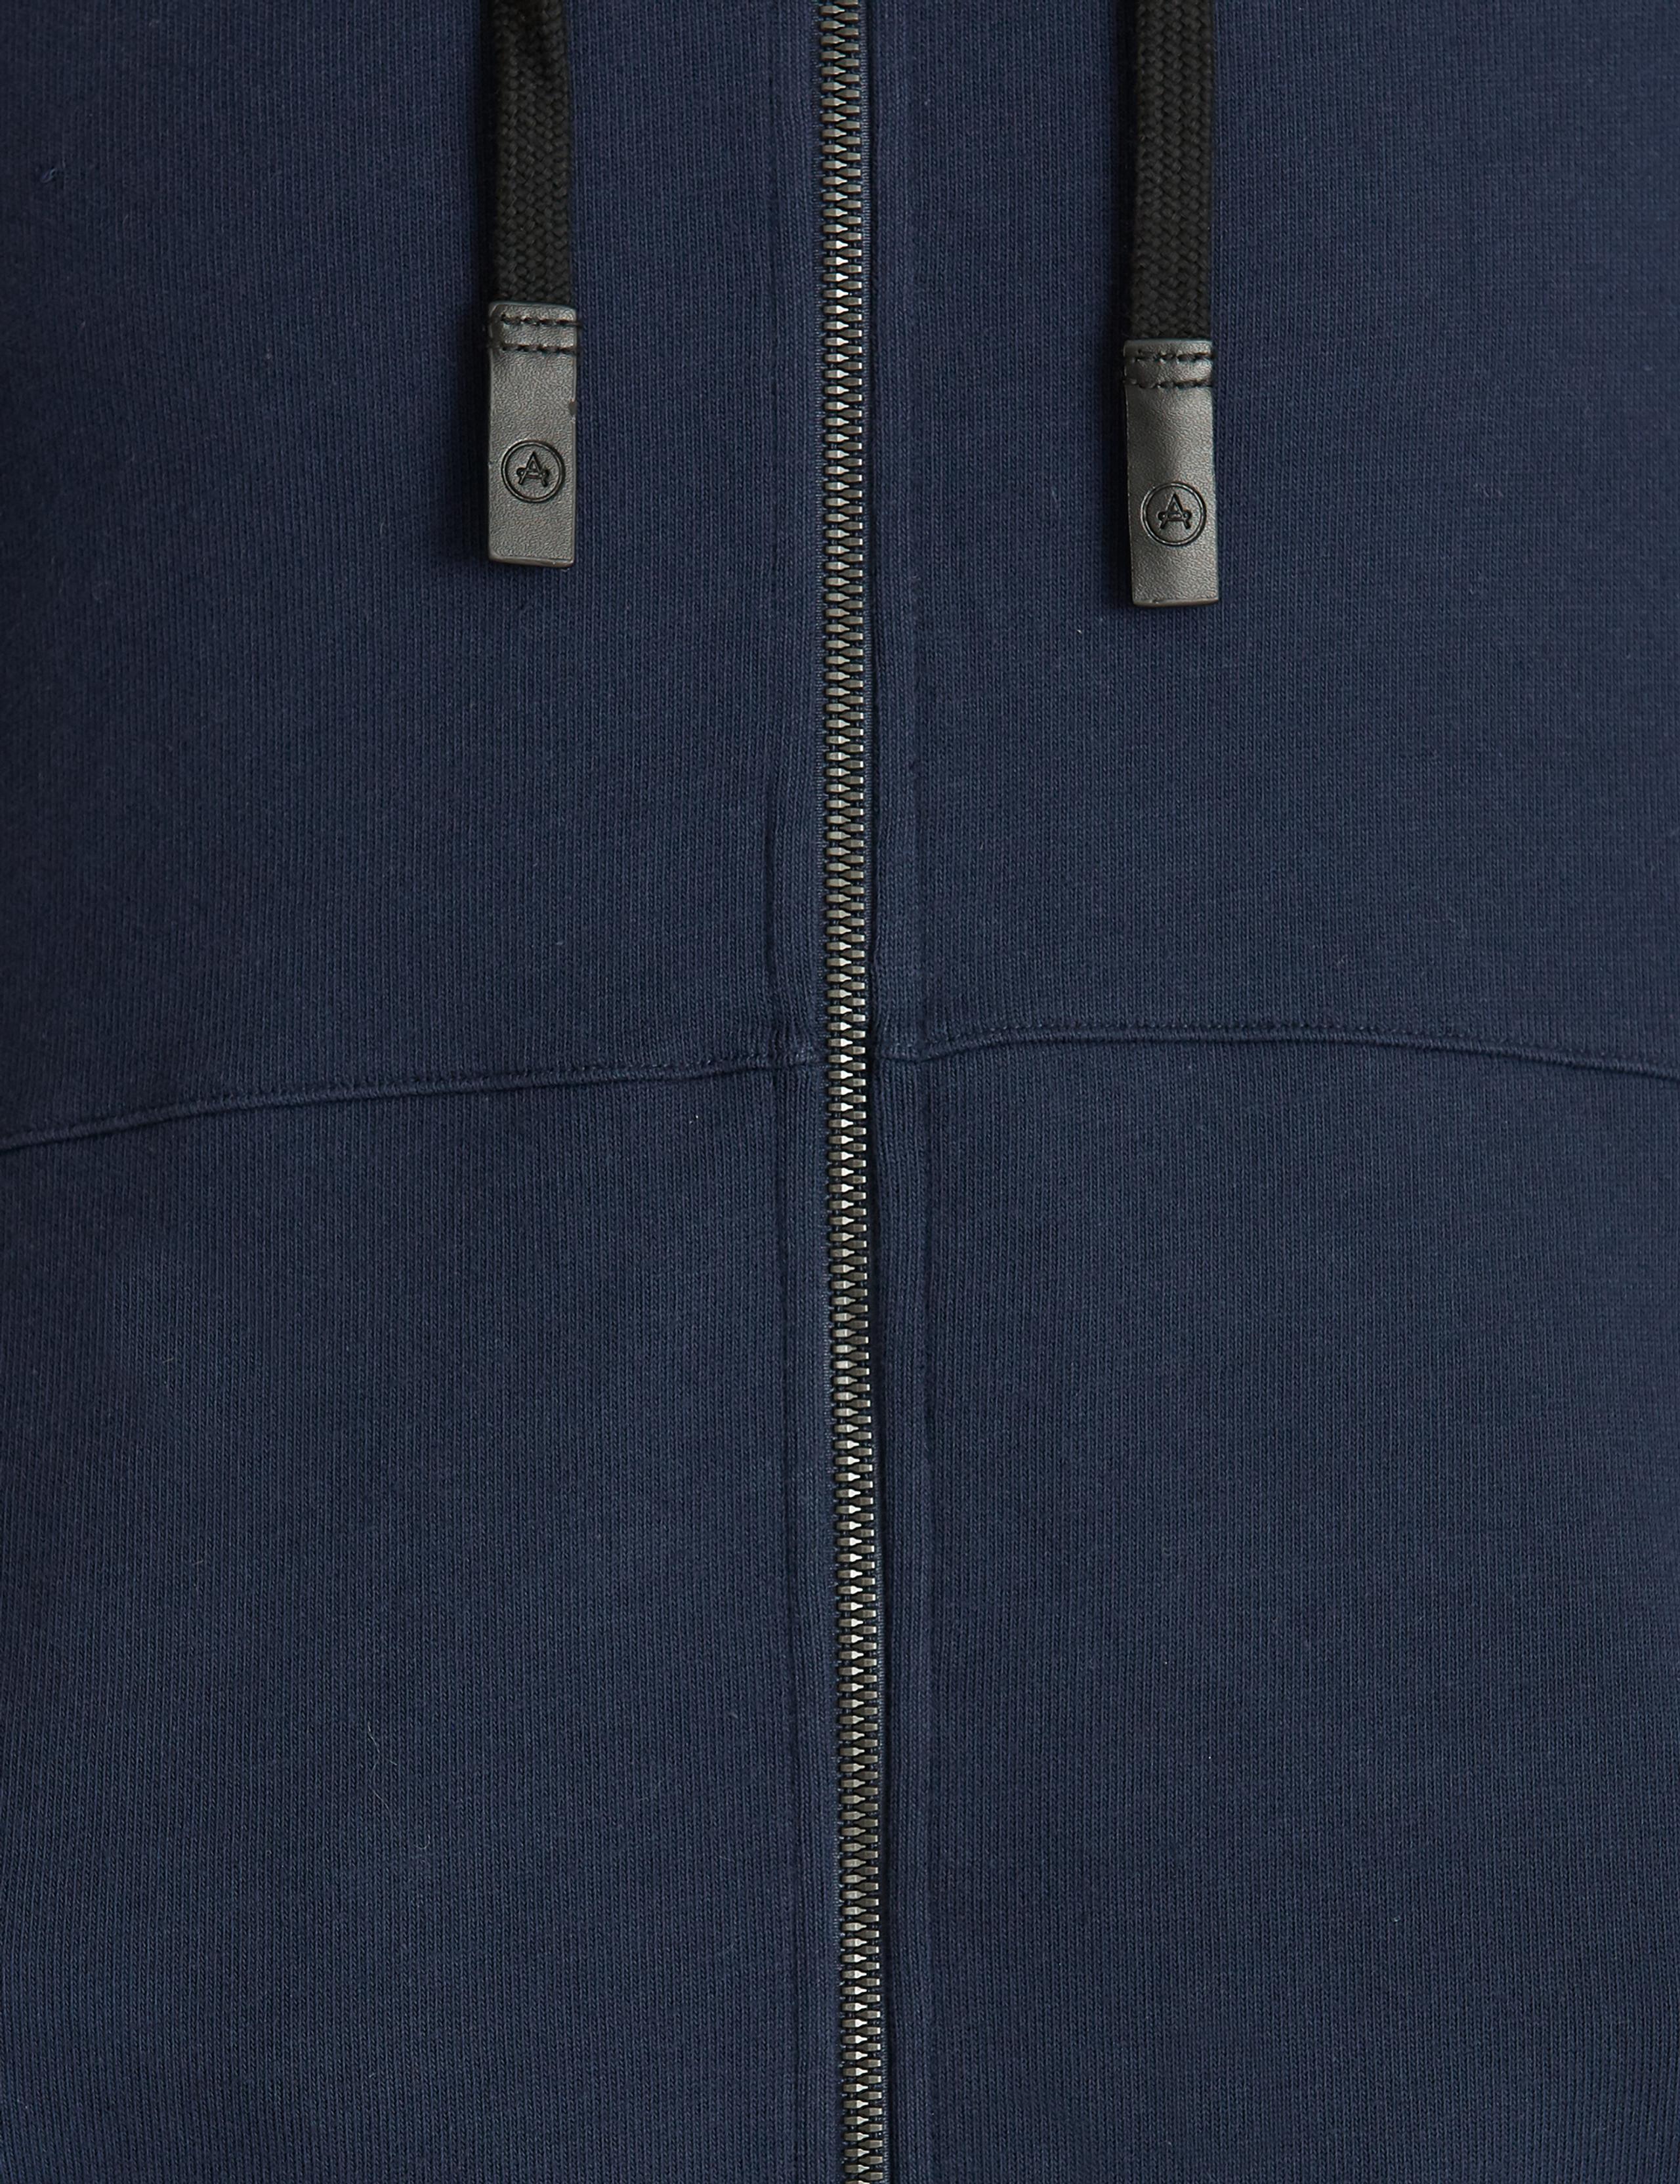 Detail view of drawcords on Jersey Hoodie